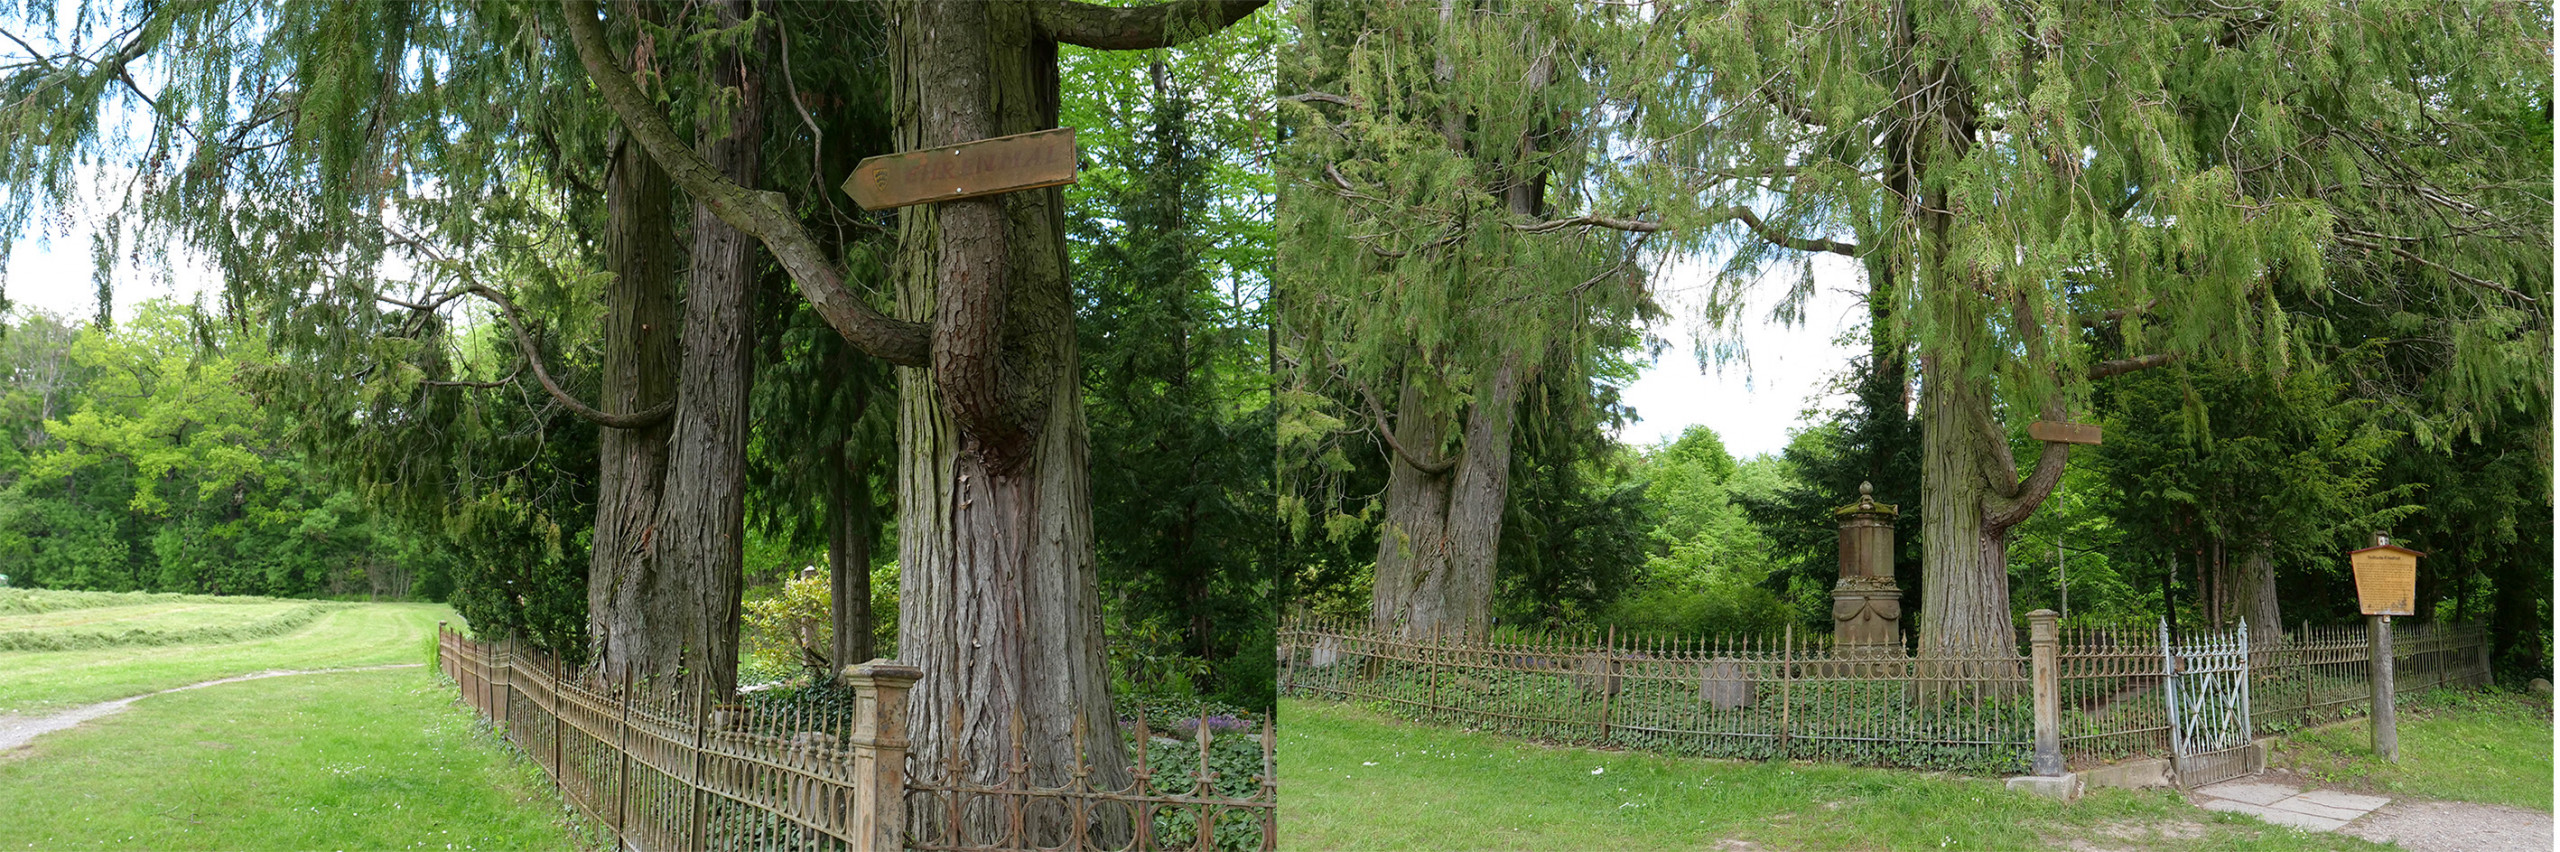 Sign pointing to the Kameraden-Gedenkstein  “Ehrenmal” next to the Solitude Cemetary. Photos: Angela Anderson (2021)